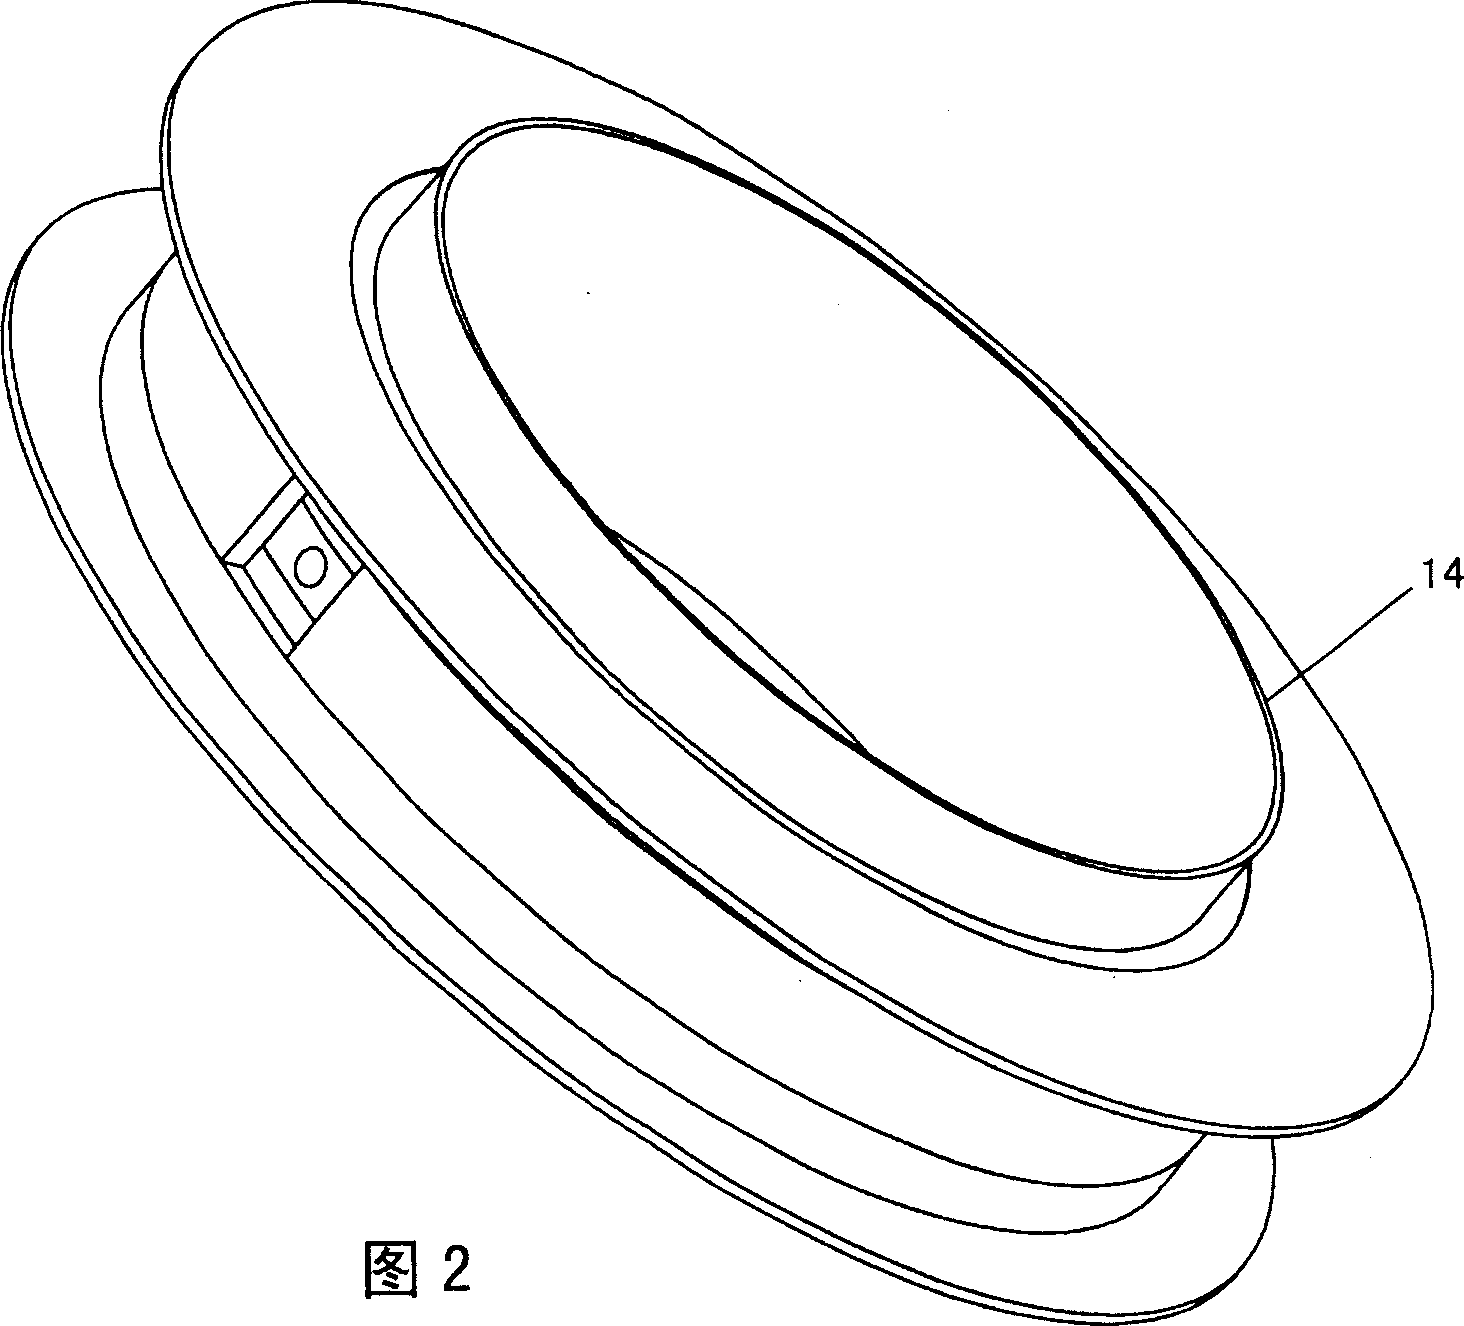 Electrovacuum tube with dual anodes, and assembling method